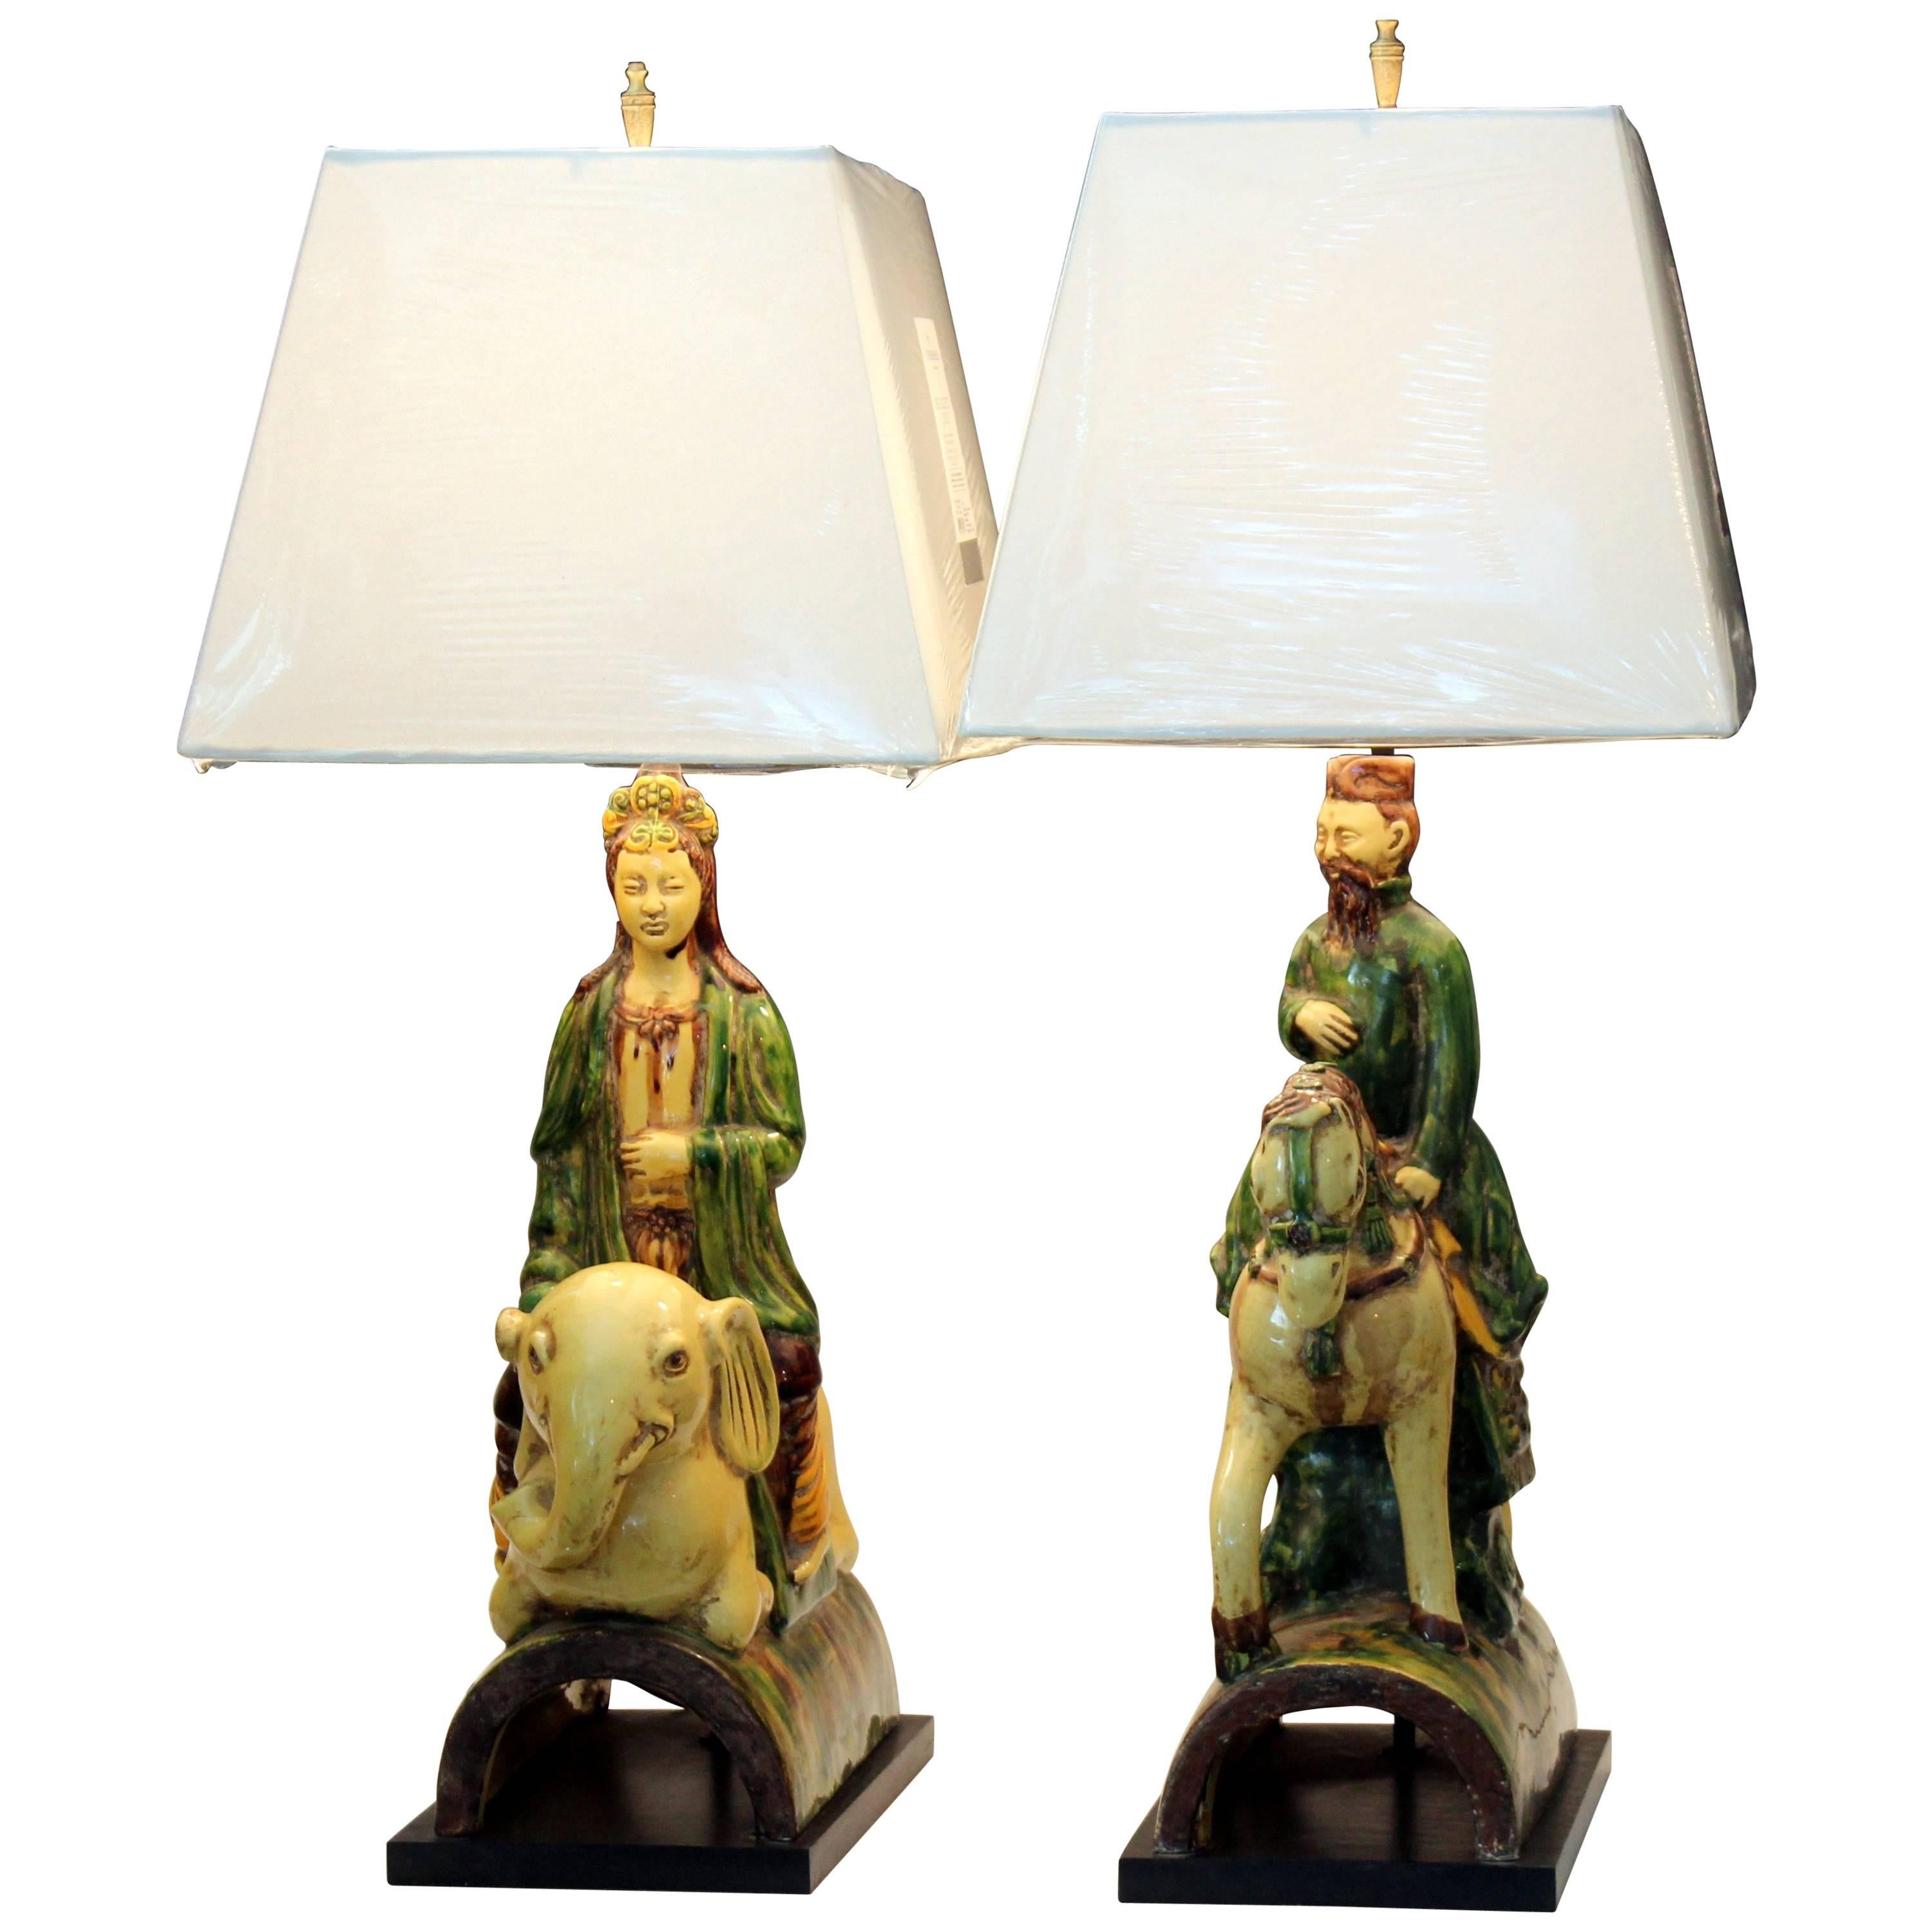 Pair of Zaccagnini Guanyin Buddha Figures Vintage Italian Ming Roof Tile Lamps